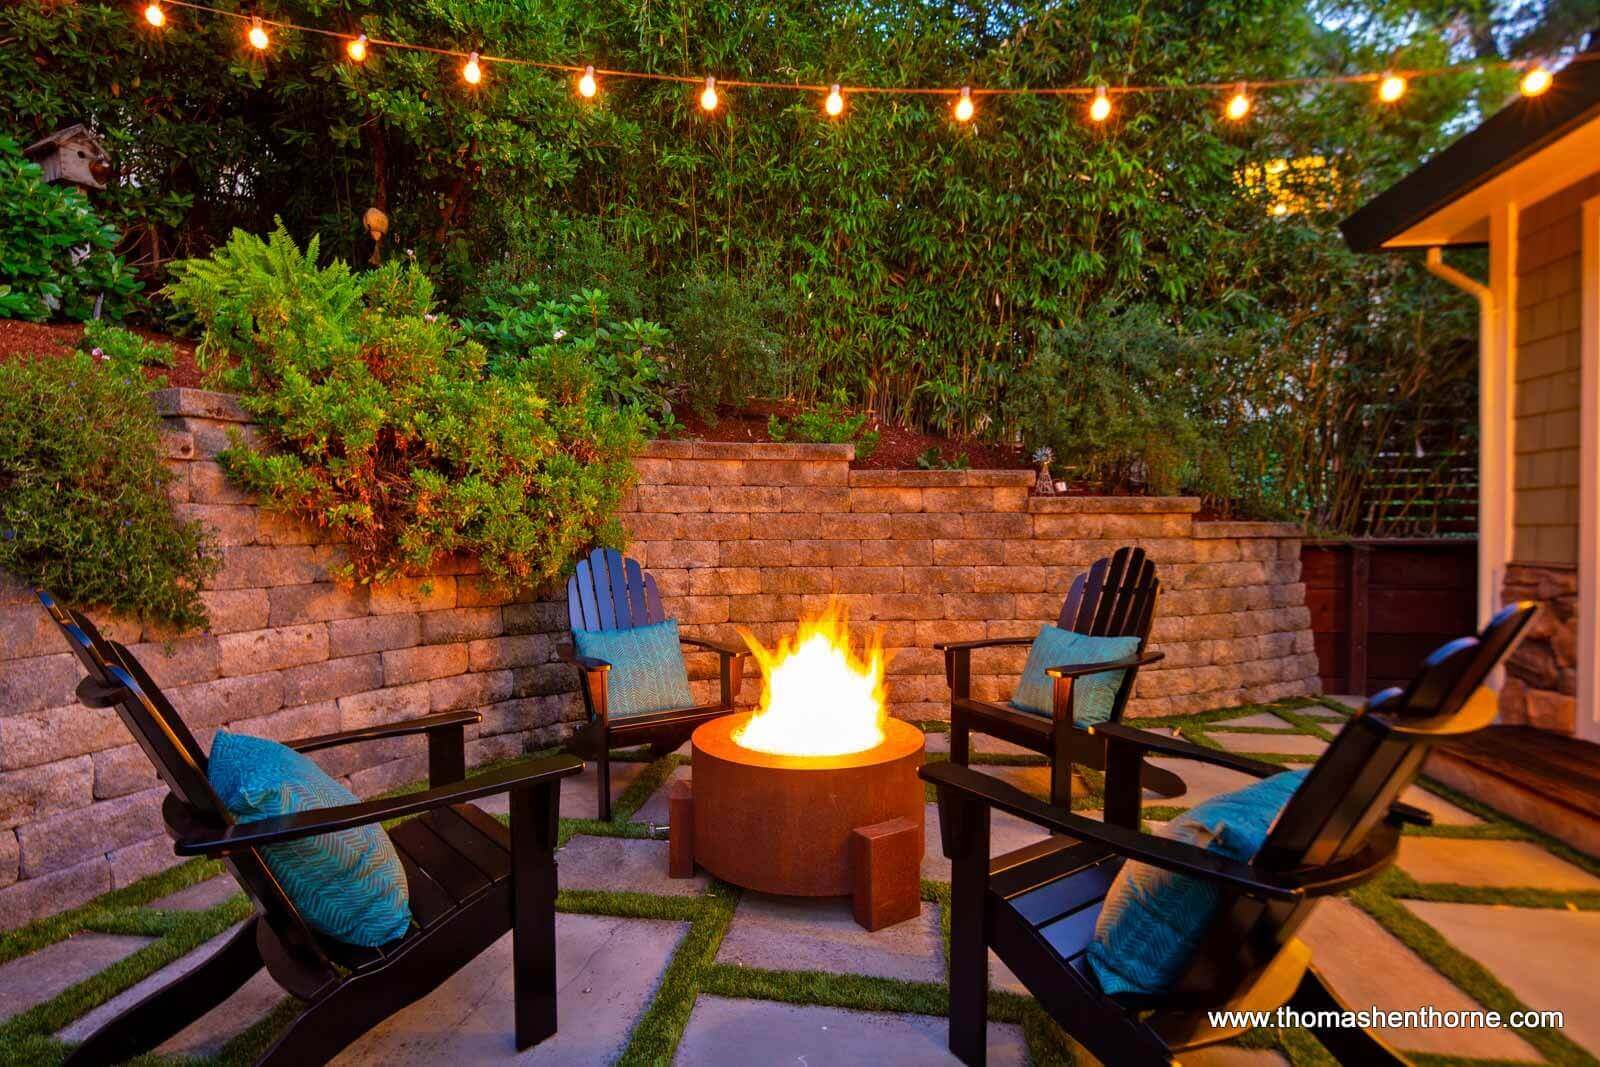 Fire Pit with Adirondack chairs surrounding